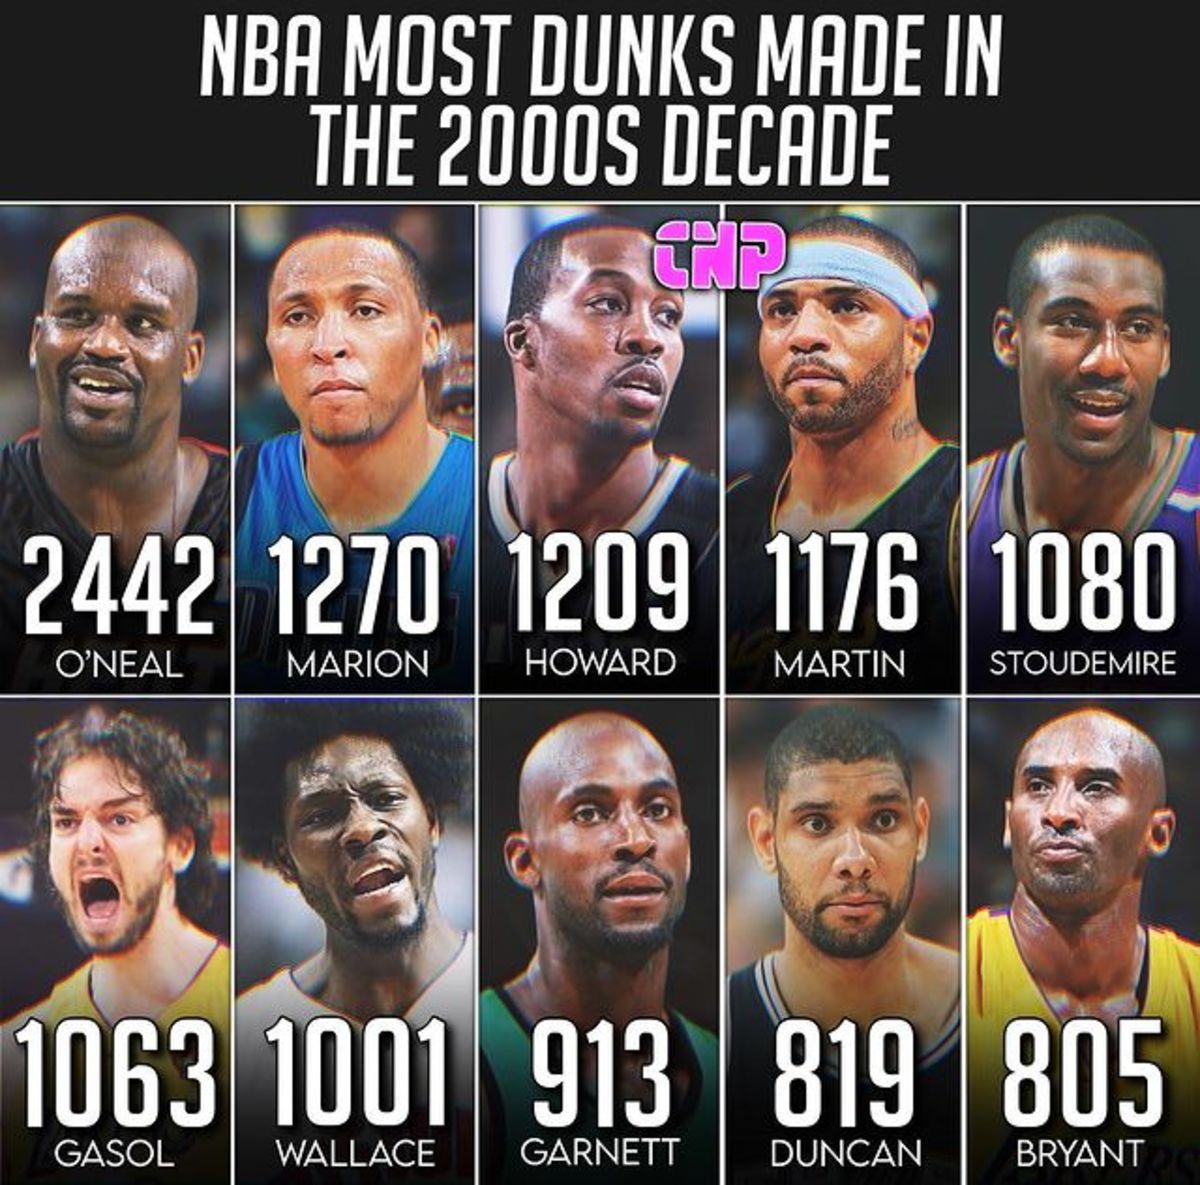 Top 10 Nba Players With The Most Dunks In The 2000s Decade Fadeaway